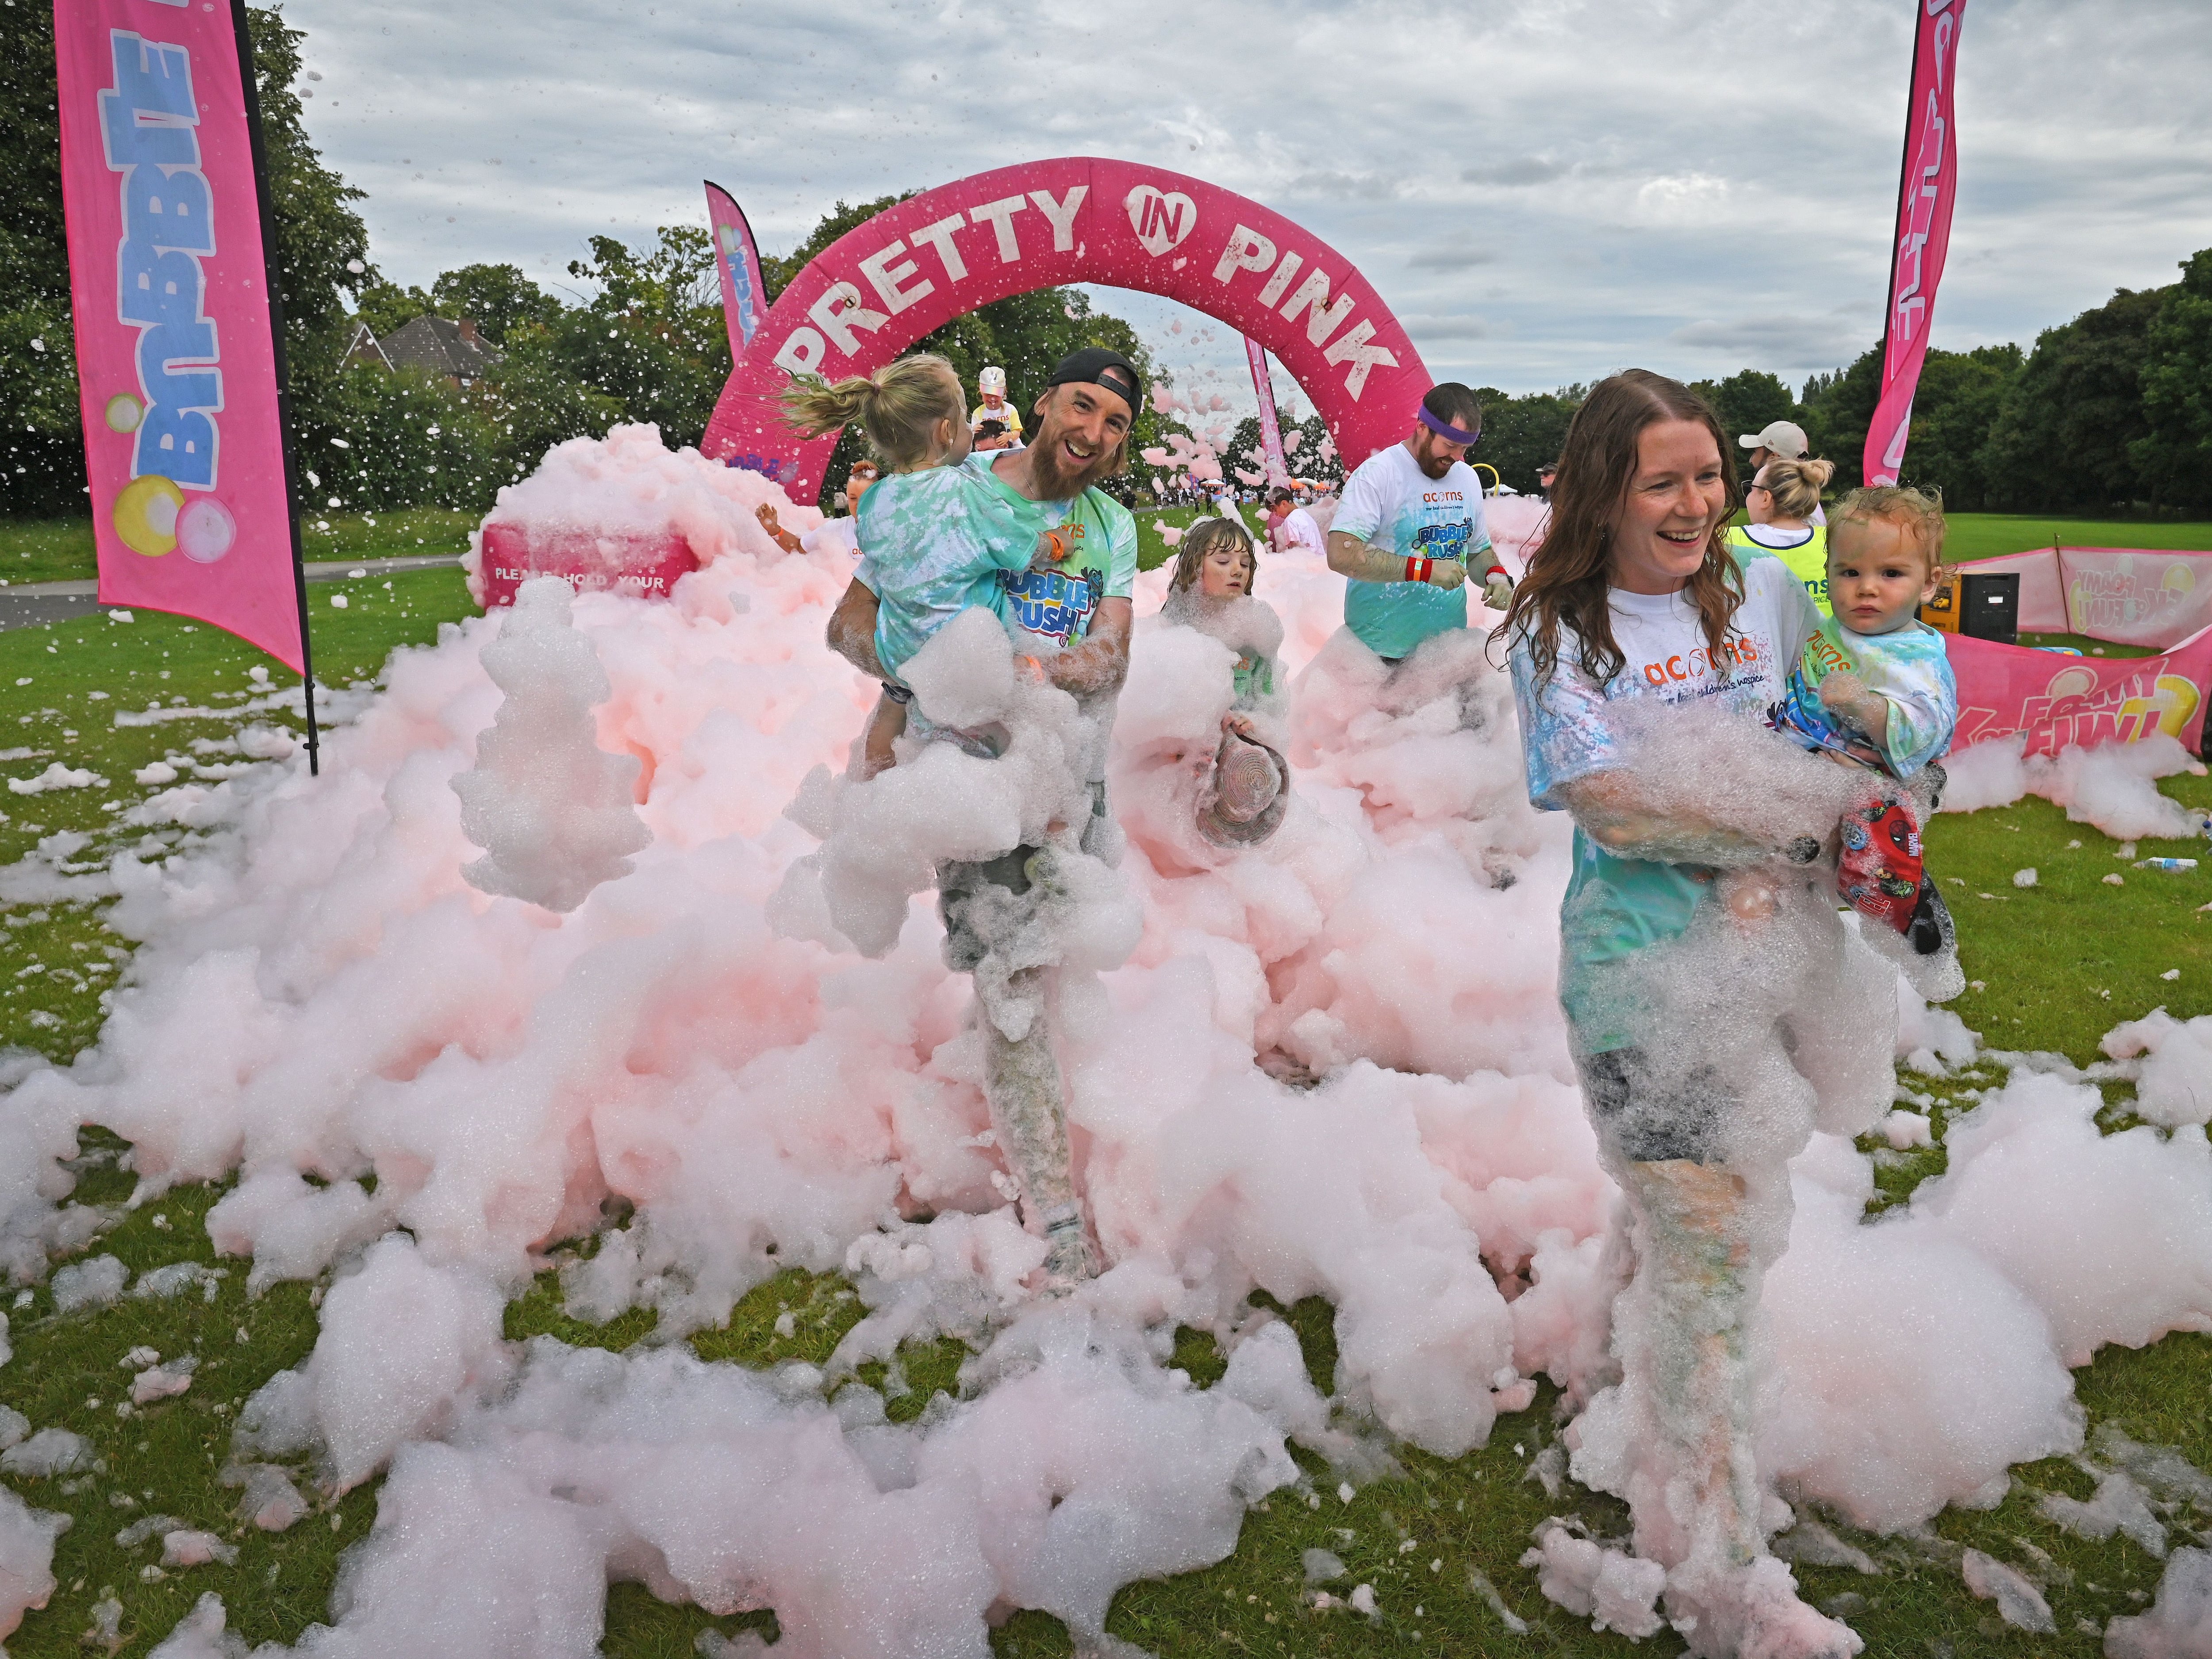 See our photos of fun in the foam as Bubble Rush charity event is sudsy success